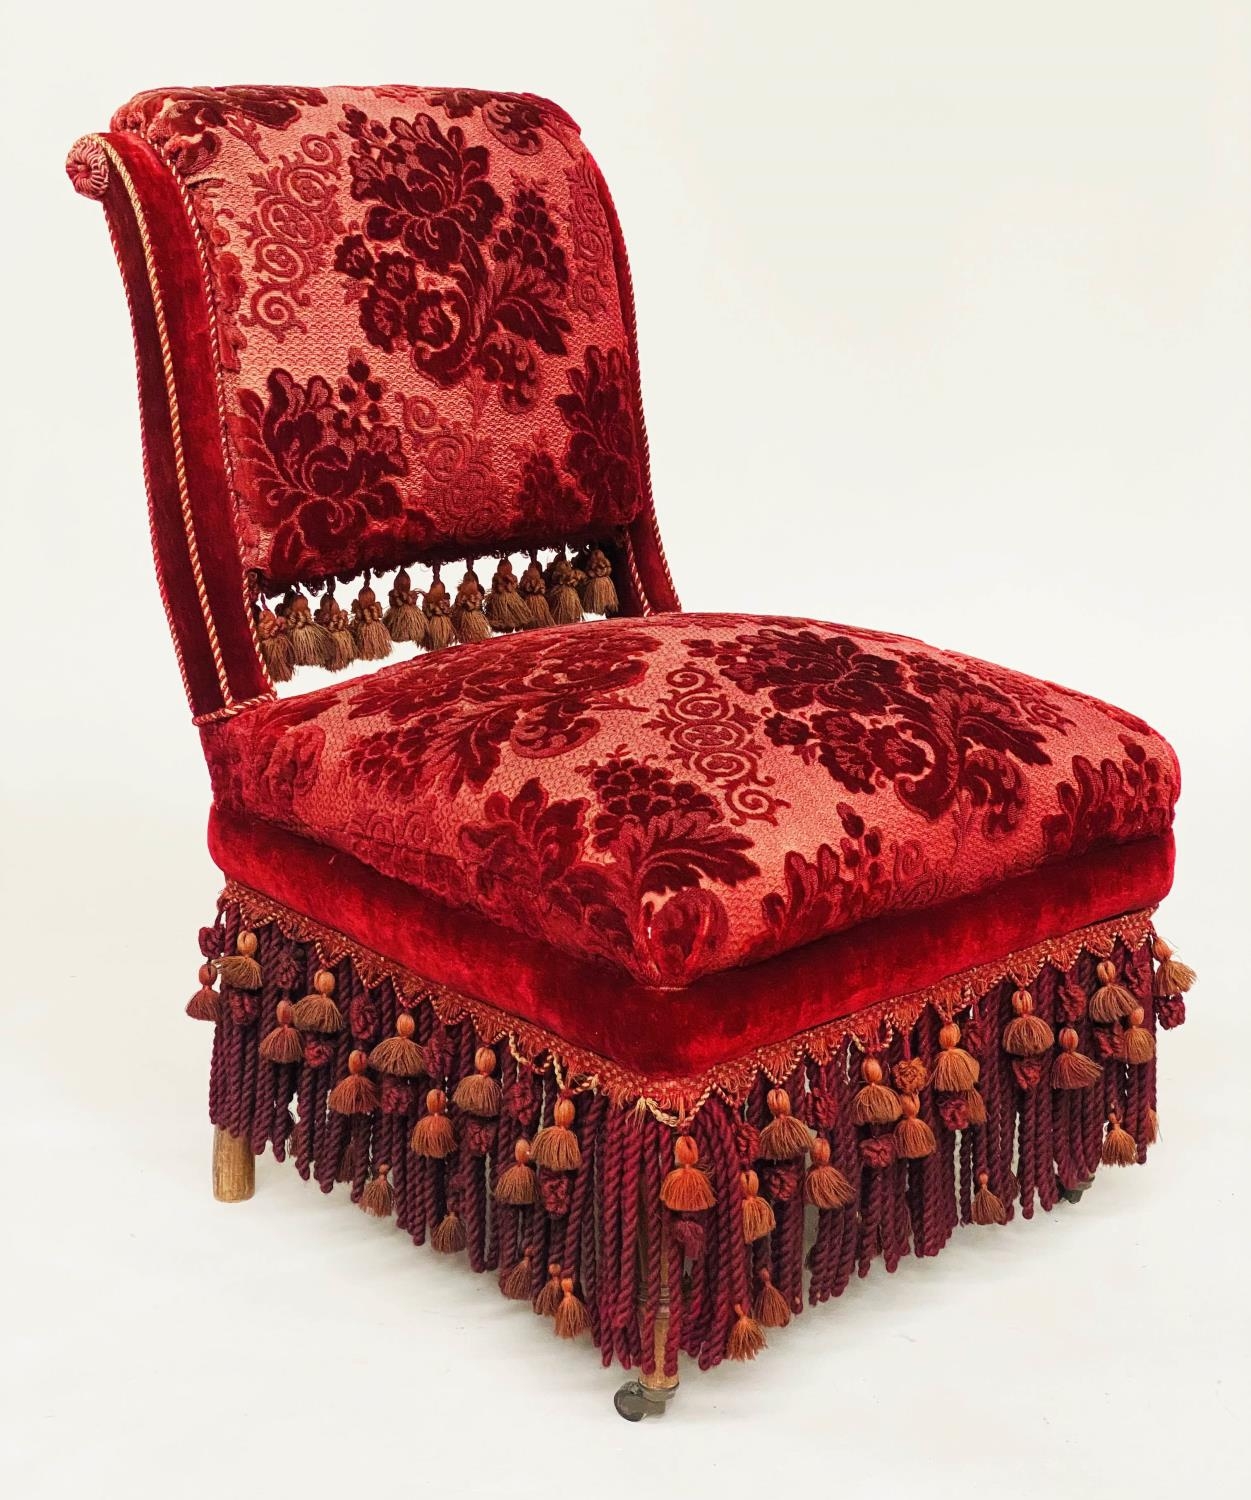 VICTORIAN PARLOUR CHAIR, retaining original, almost as new, crimson brocade and rope and tassle